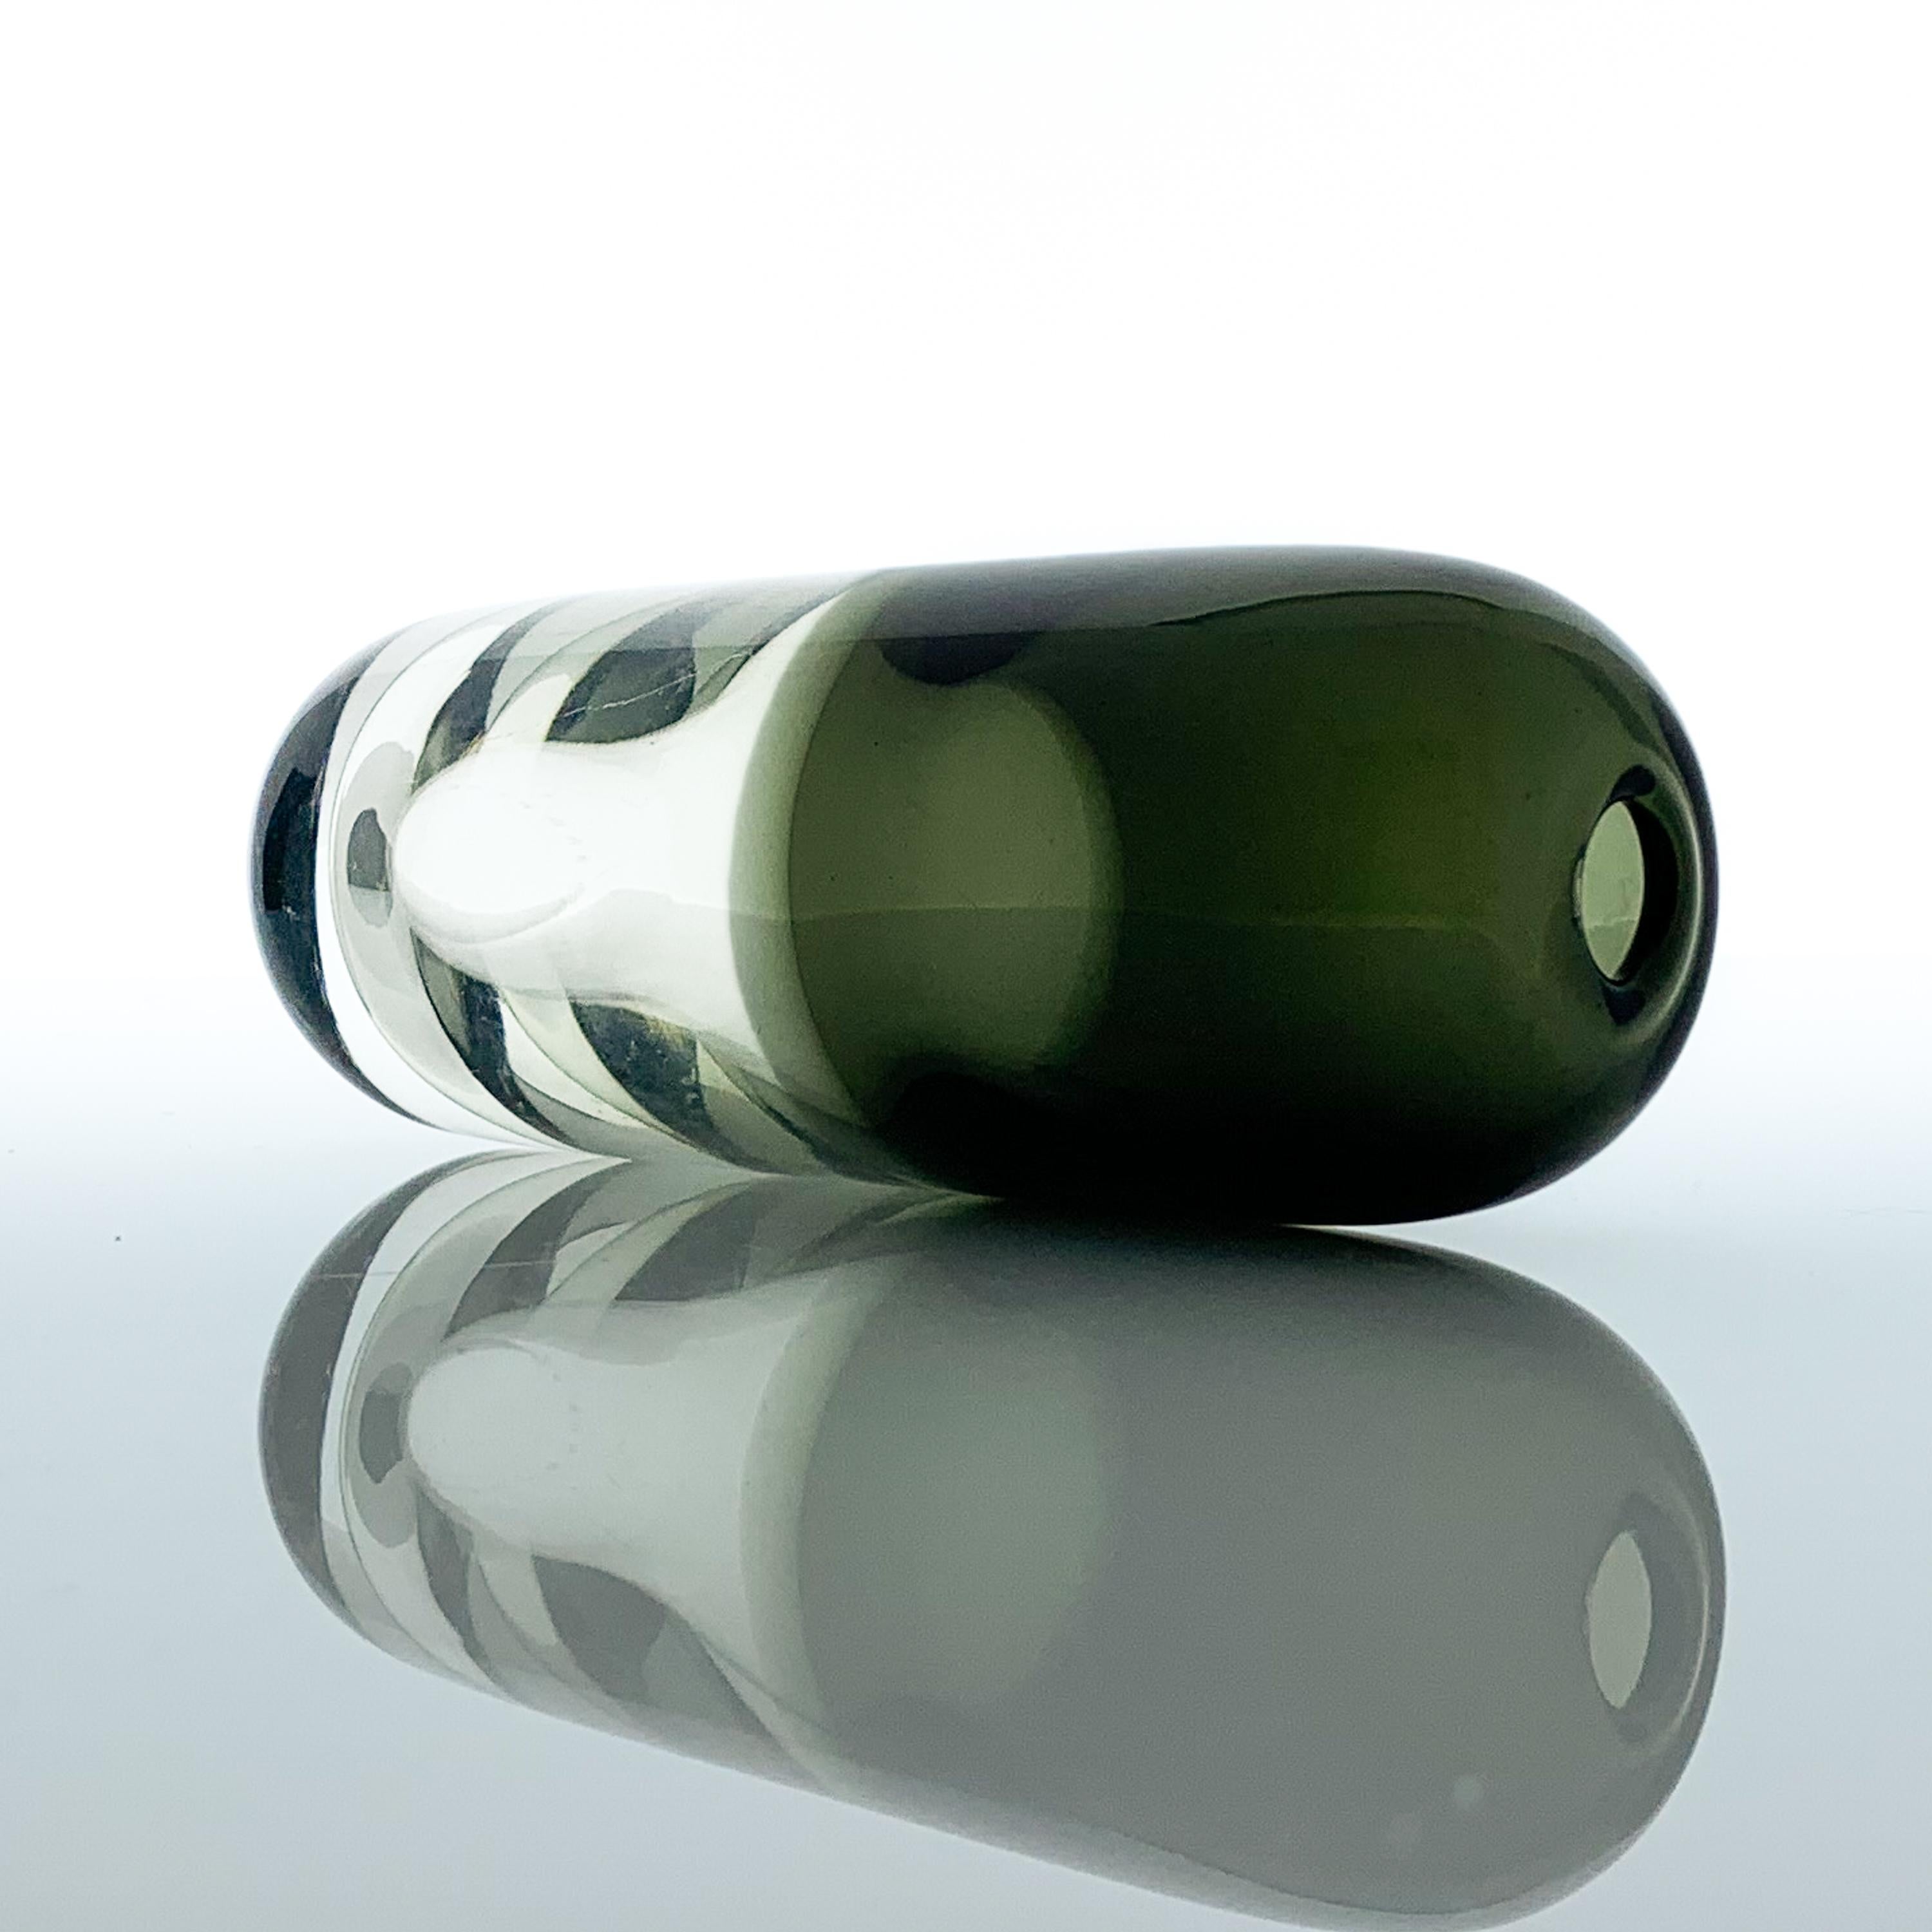 Hand-Crafted Timo Sarpaneva, Clear and Darkgreen Glass Art-Object, Model 3599, Iittala, 1957